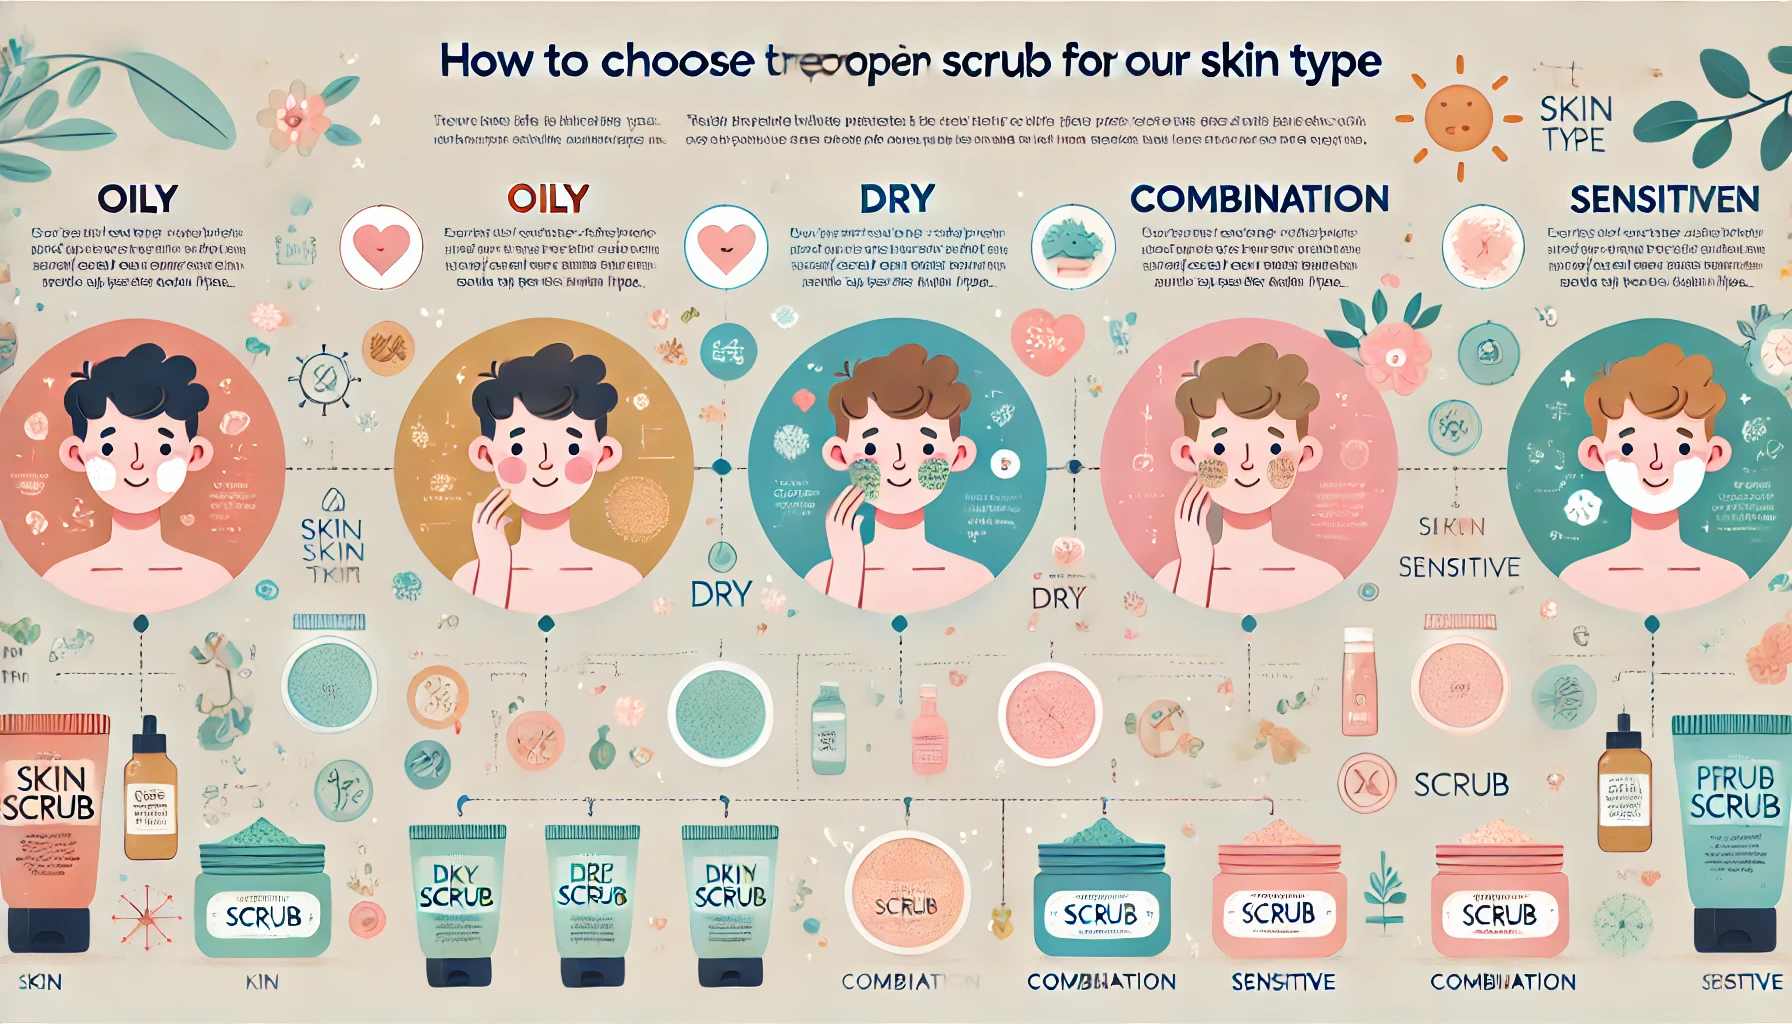 How to choose the proper scrub for your skin type